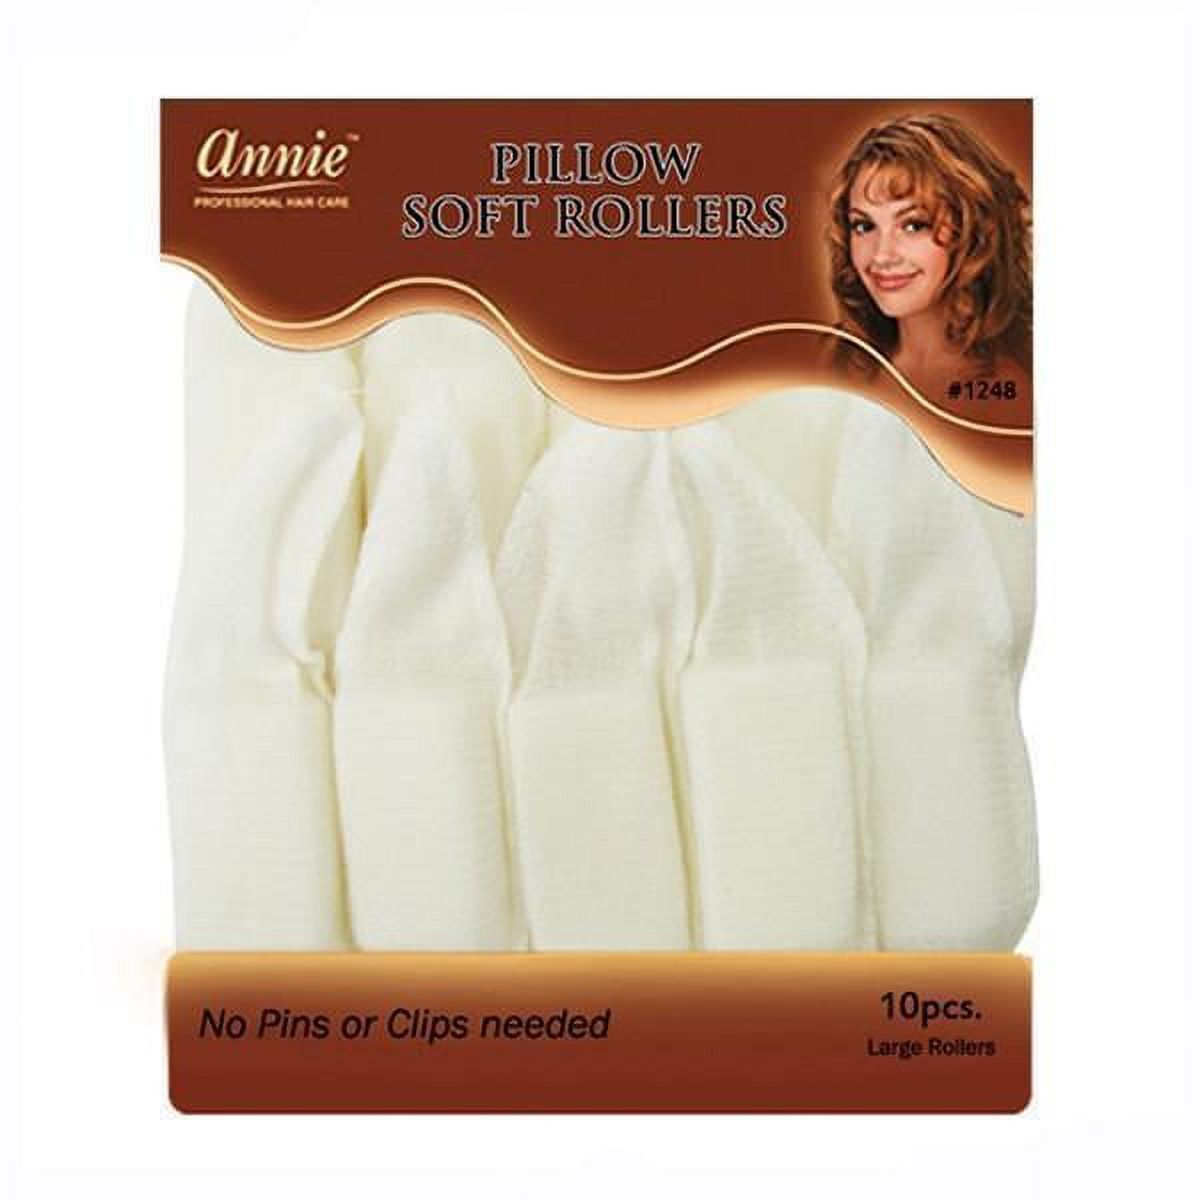 Annie Pillow Soft Large White Hair Rollers - 10 Pcs. - image 1 of 3